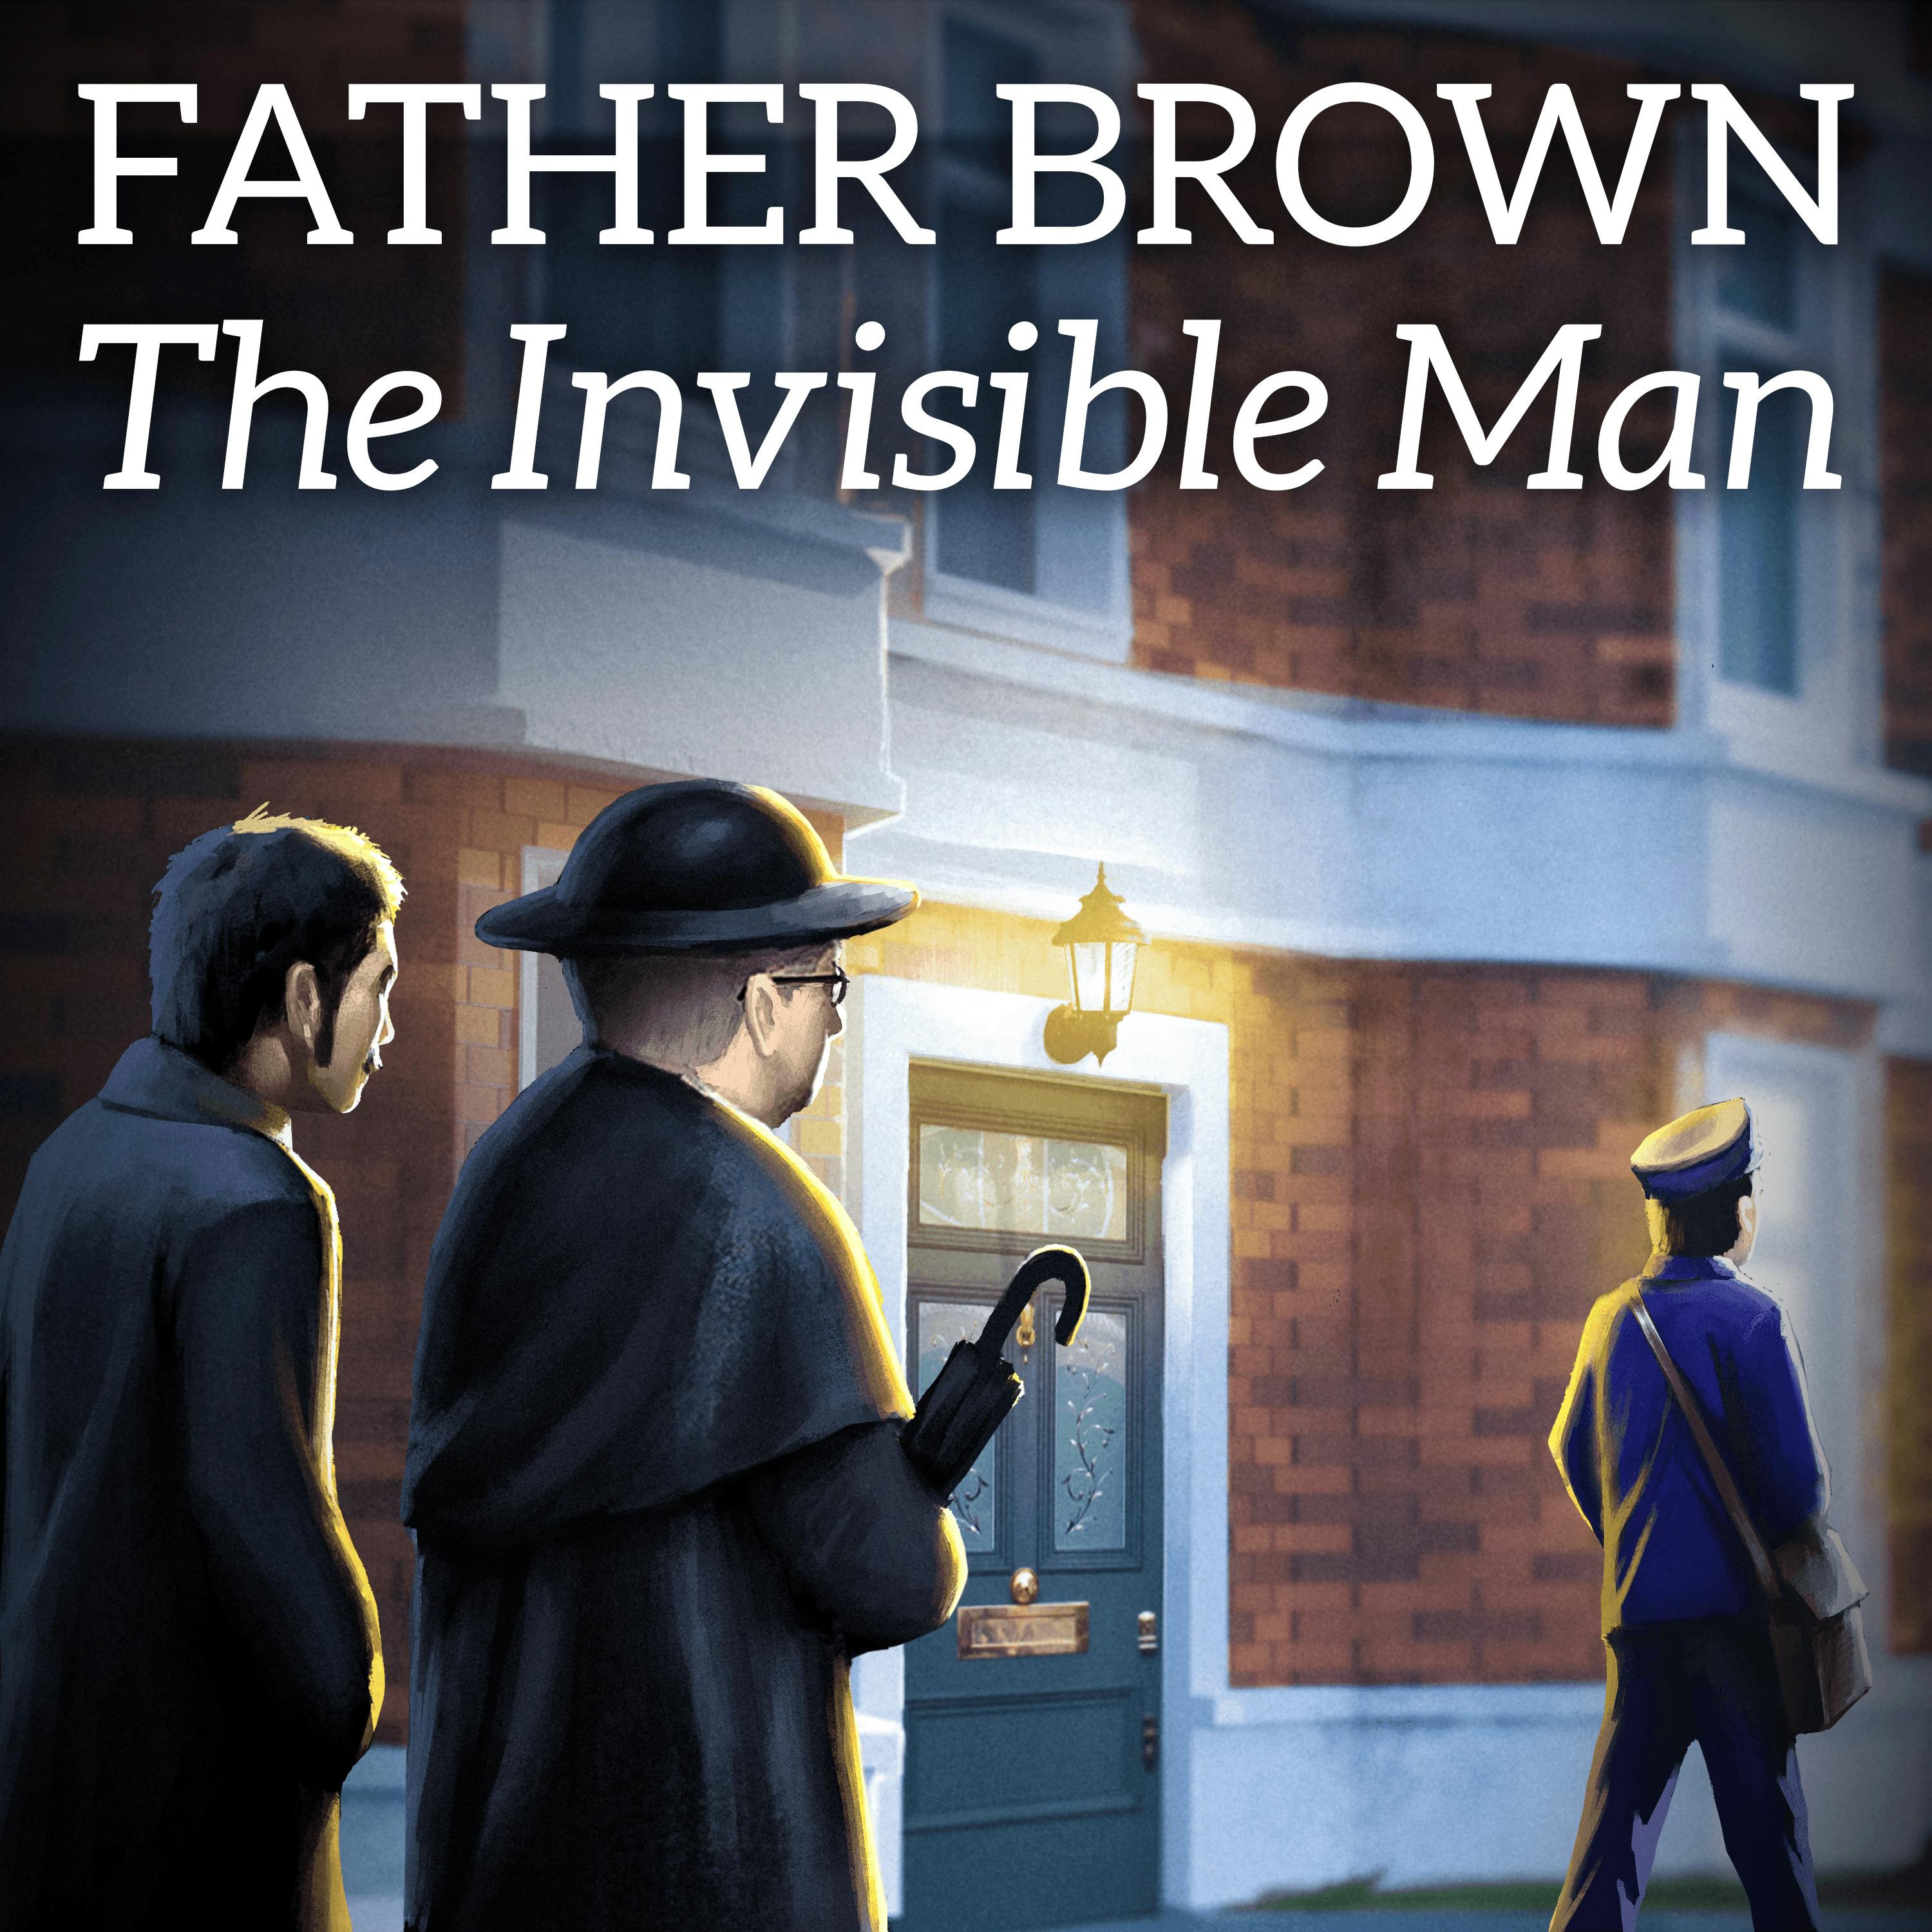 Father Brown and the Invisible Man - A Detective Mystery Story